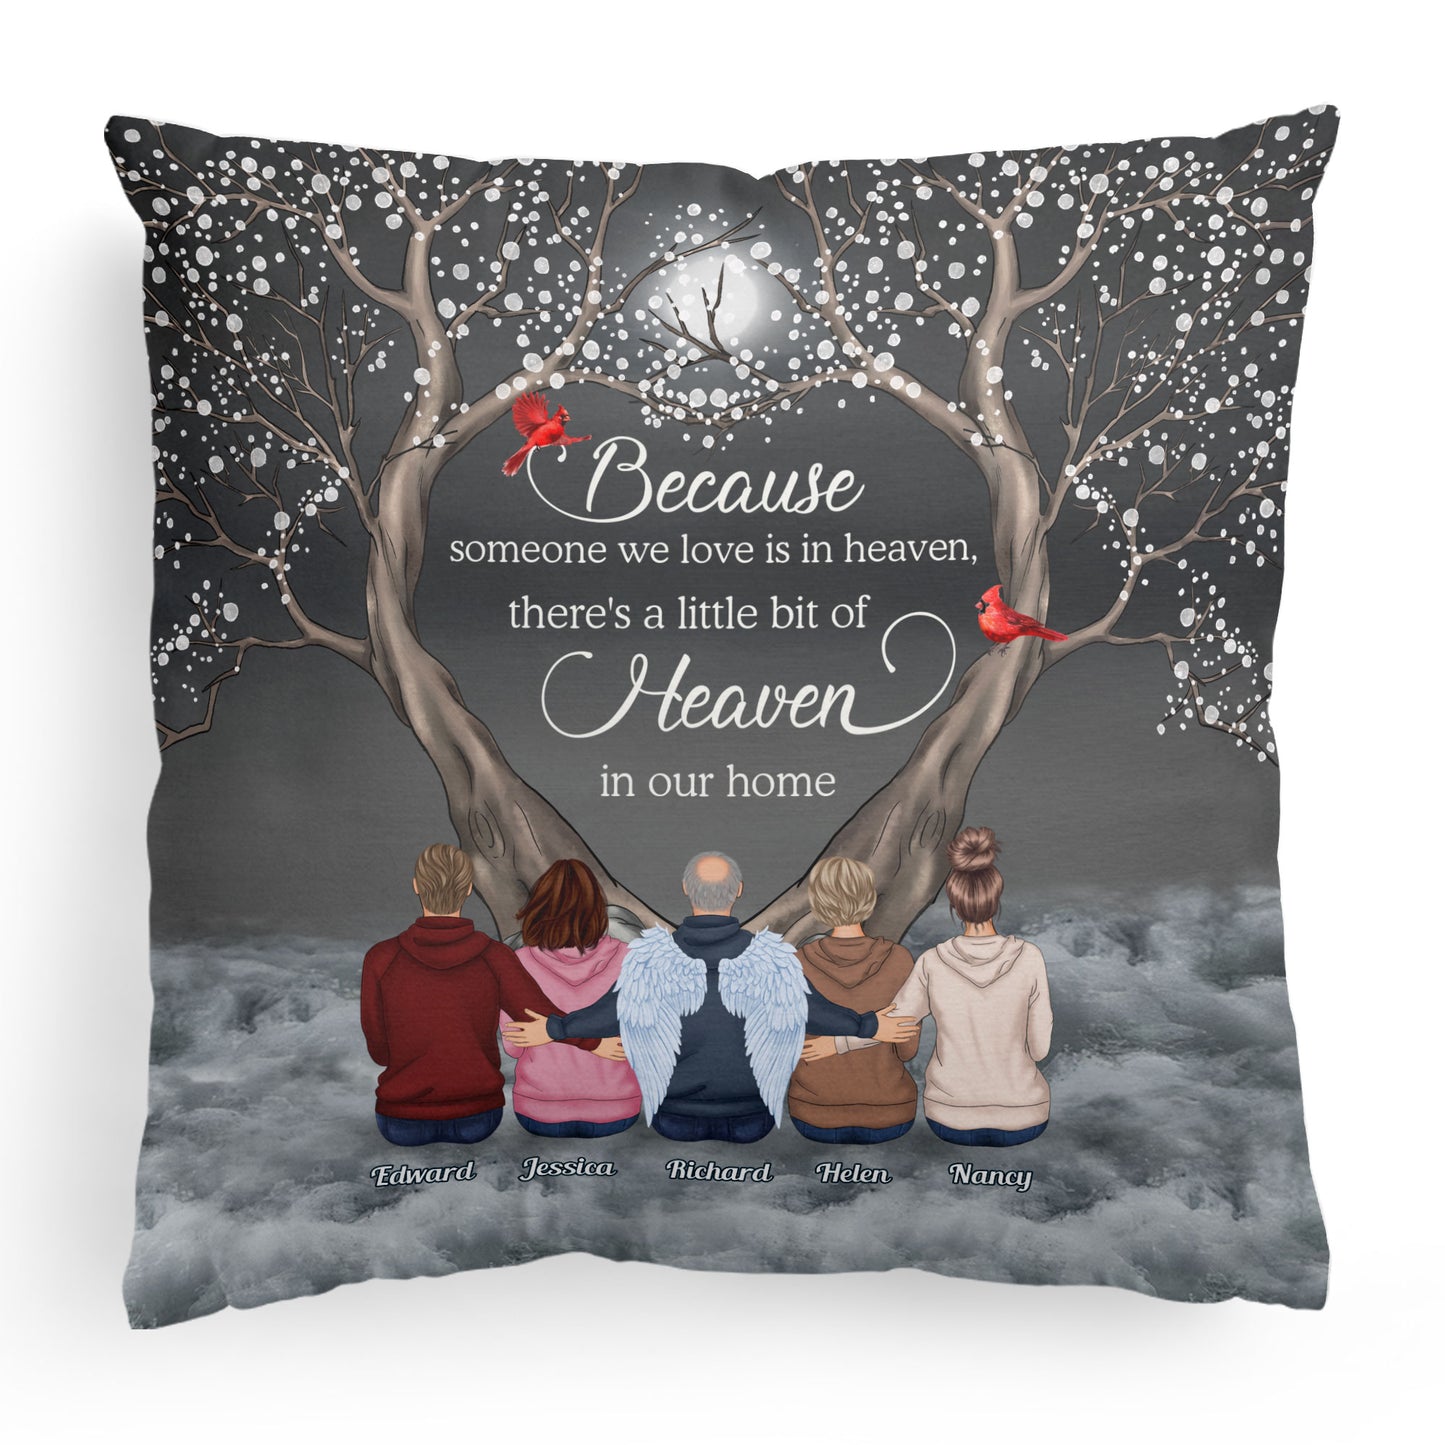 There's A Little Bit Of Heaven In Our Home - Personalized Pillow